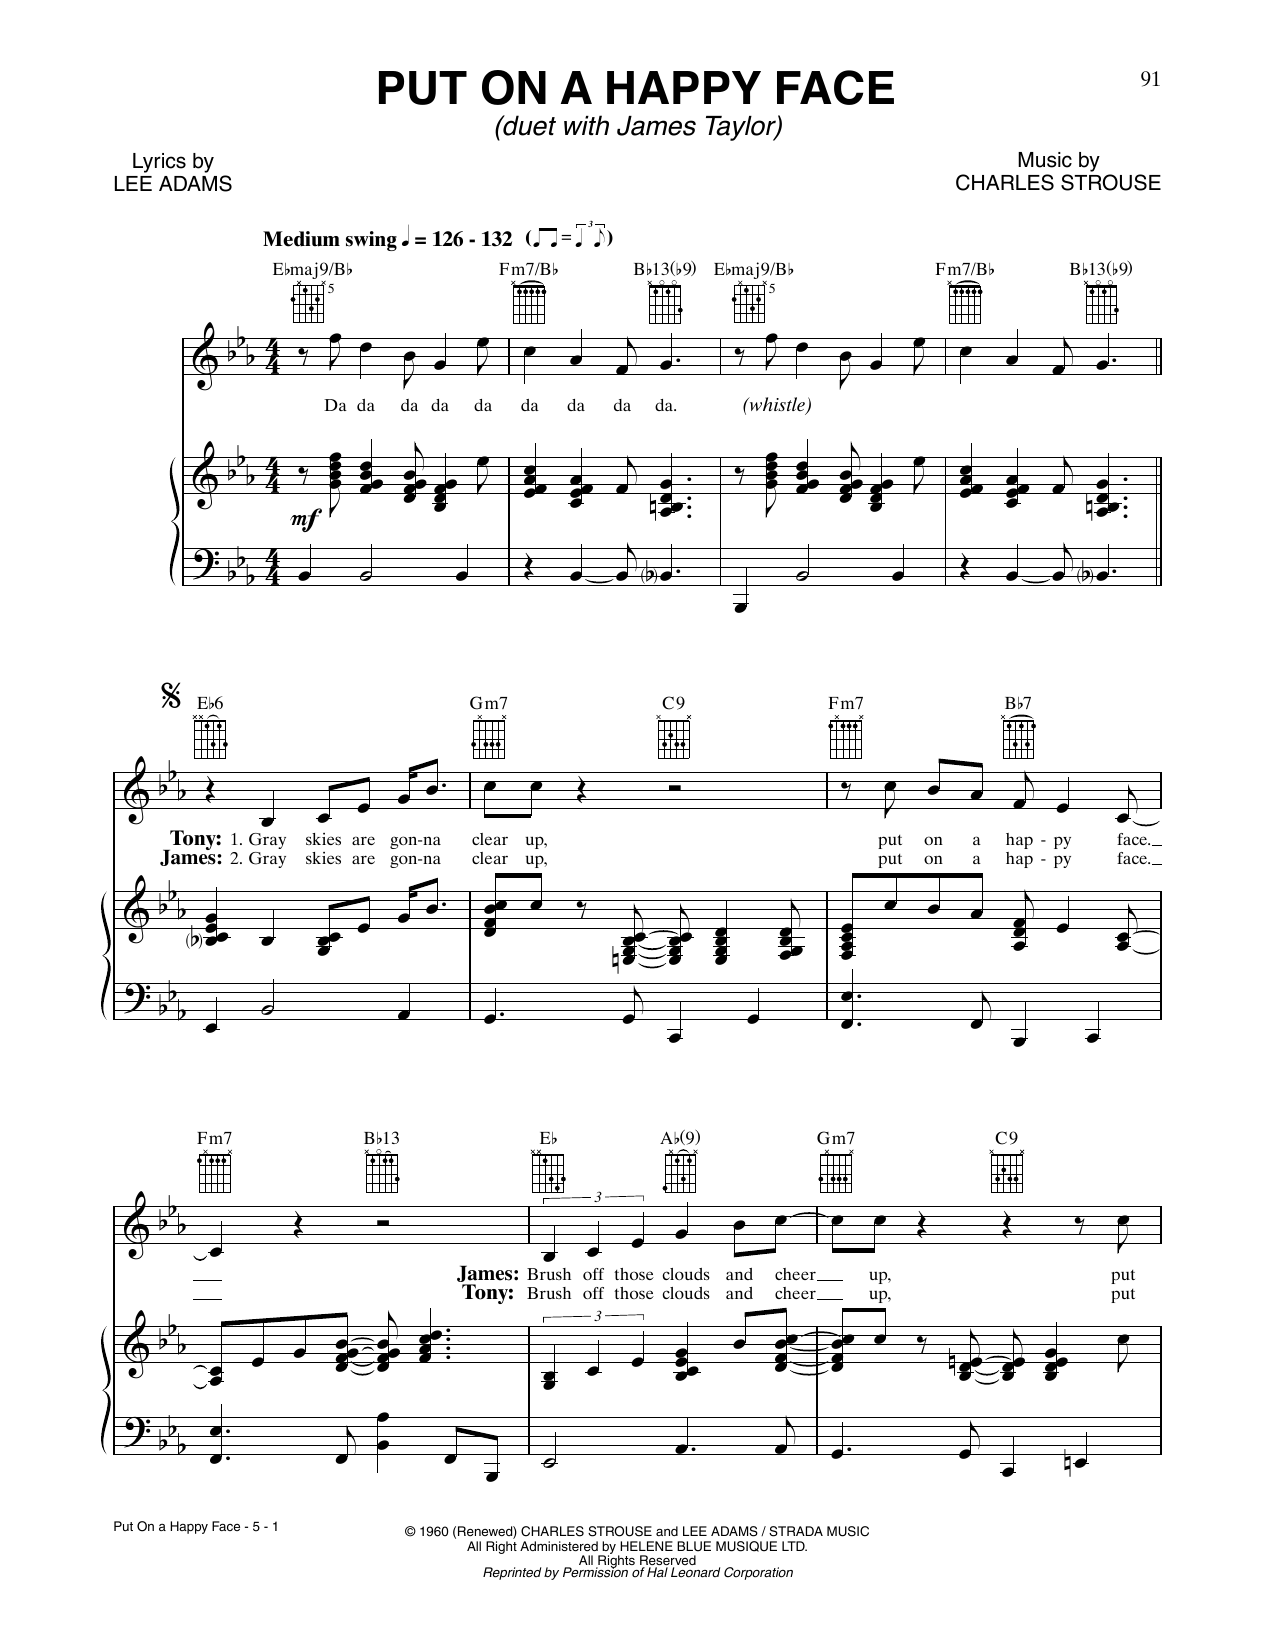 Tony Bennett And James Taylor Put On A Happy Face Sheet Music Pdf